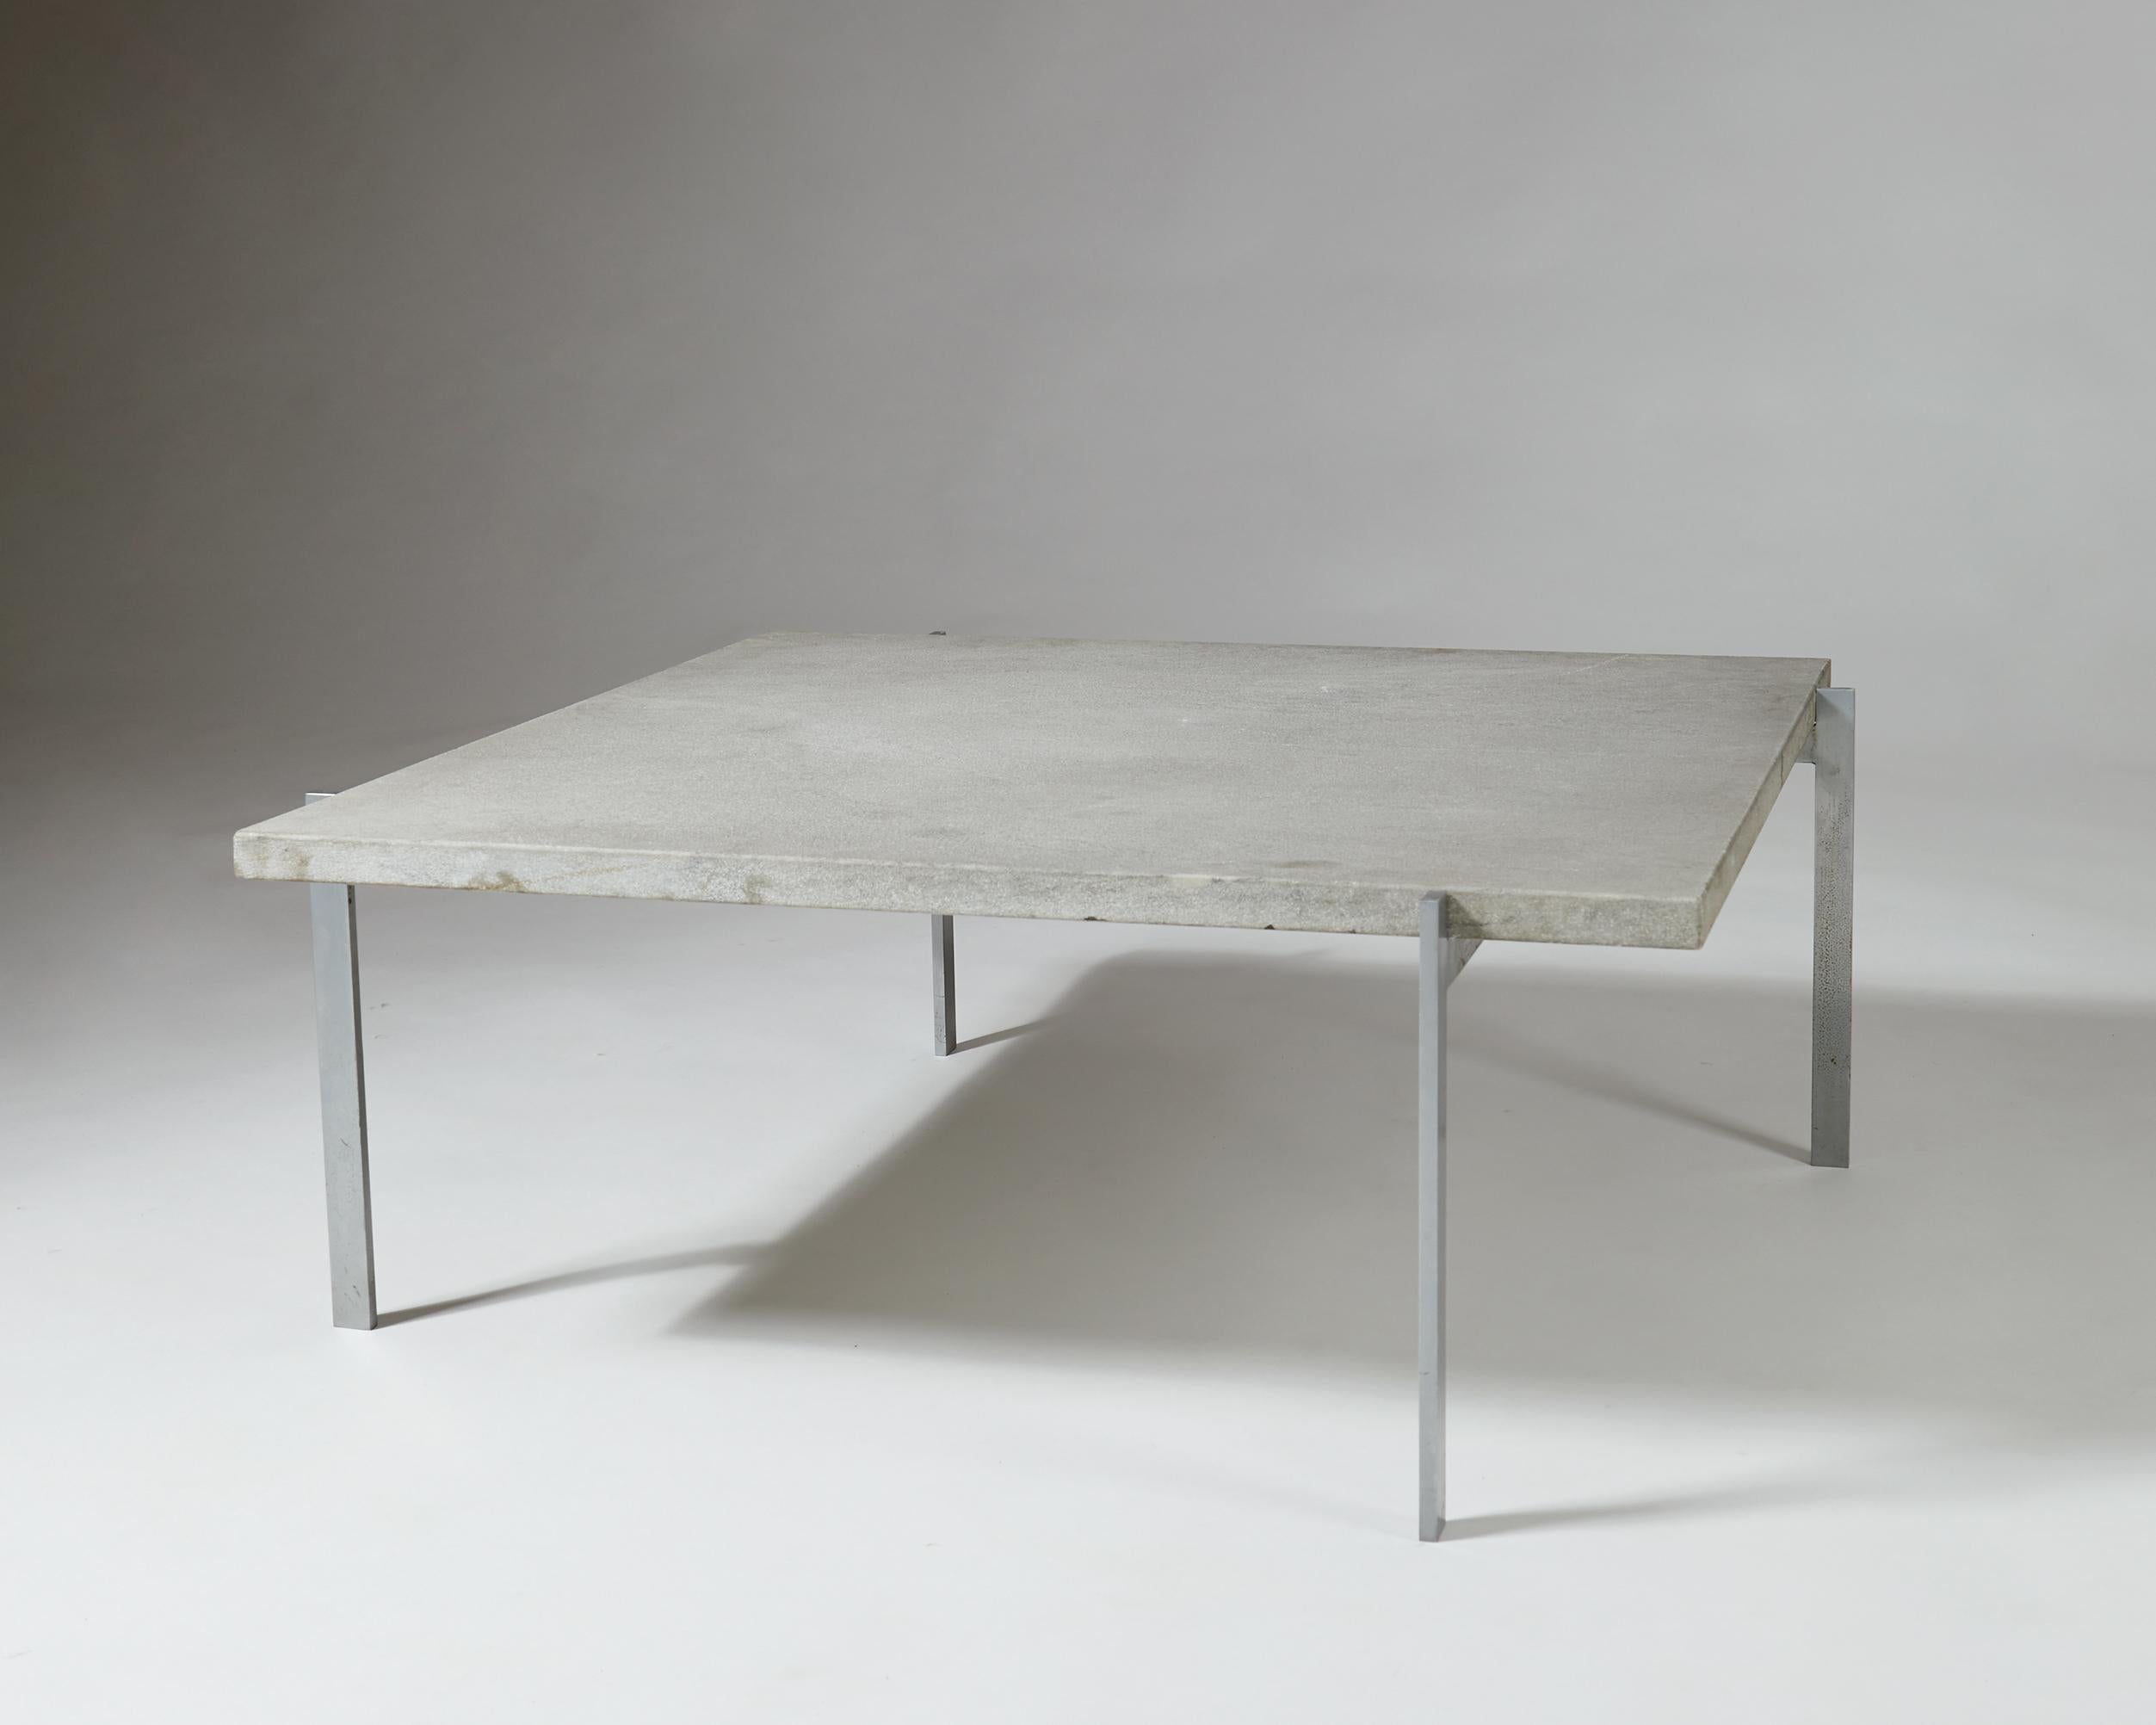 Occasional table PK61 designed by Poul Kjaerholm for E. Kold Christensen,
Denmark, 1956.

Coffee table / occasional table in steel and flint-rolled Cipollini marble.

Dimensions: 
H: 33 cm/ 13''
L: 85 cm/ 33 1/2''
W: 85 cm/ 33 1/2''